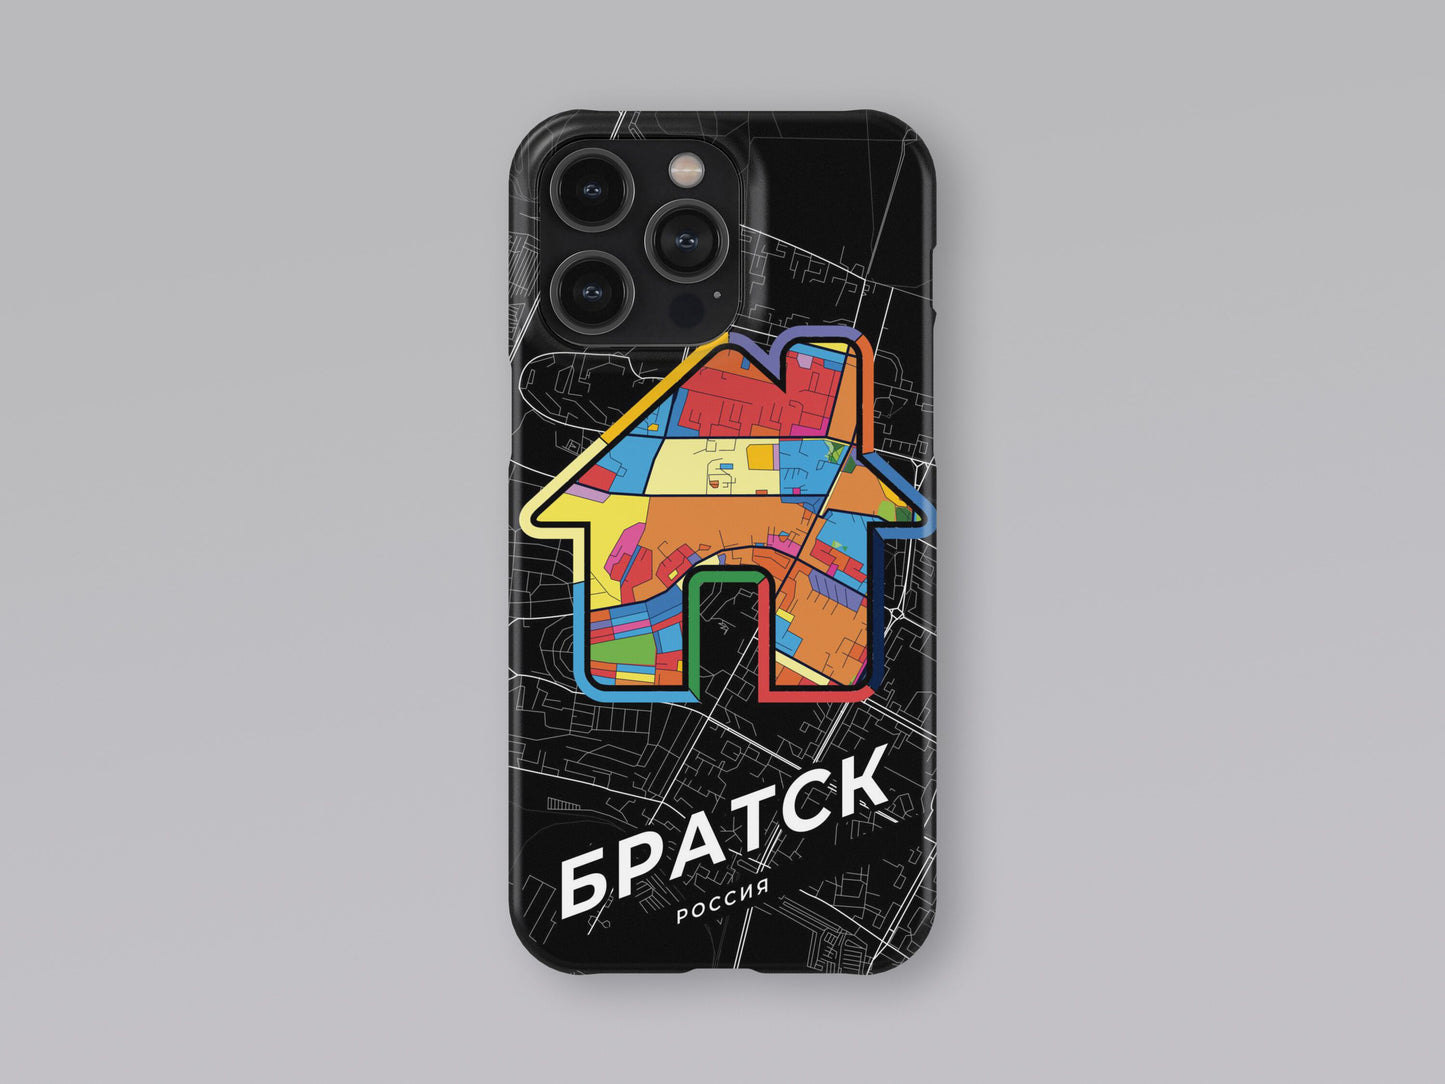 Bratsk Russia slim phone case with colorful icon. Birthday, wedding or housewarming gift. Couple match cases. 3